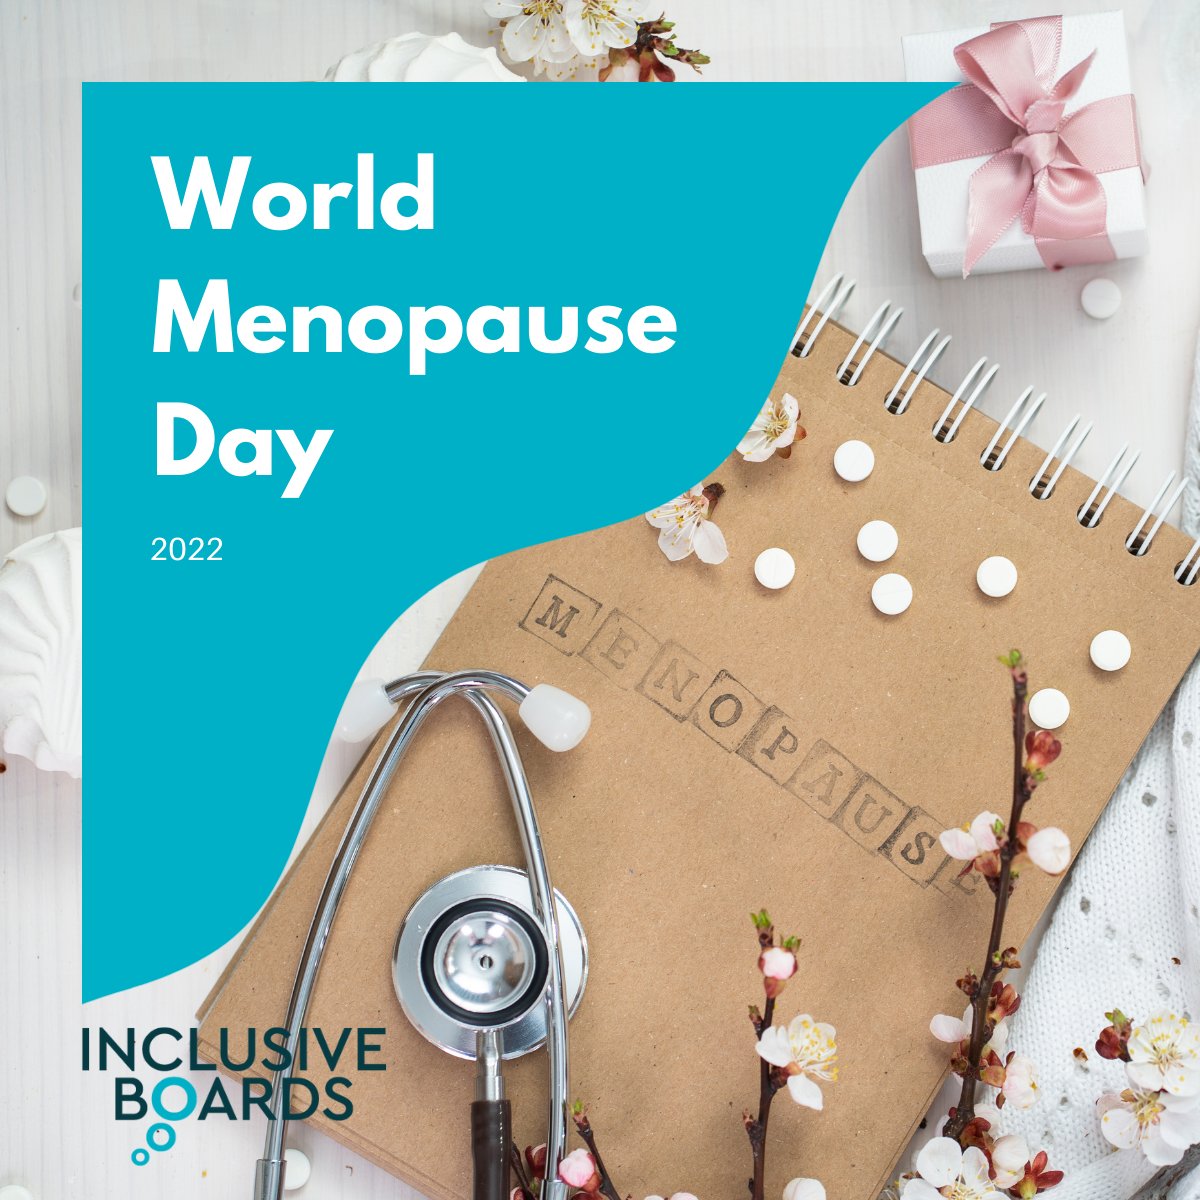 The occasion of World Menopause Day reminds us to work towards health and wellness of women during menopause and that can happen only when we are aware of this phase. #inclusiveboards wishes you Happy World Menopause Day!